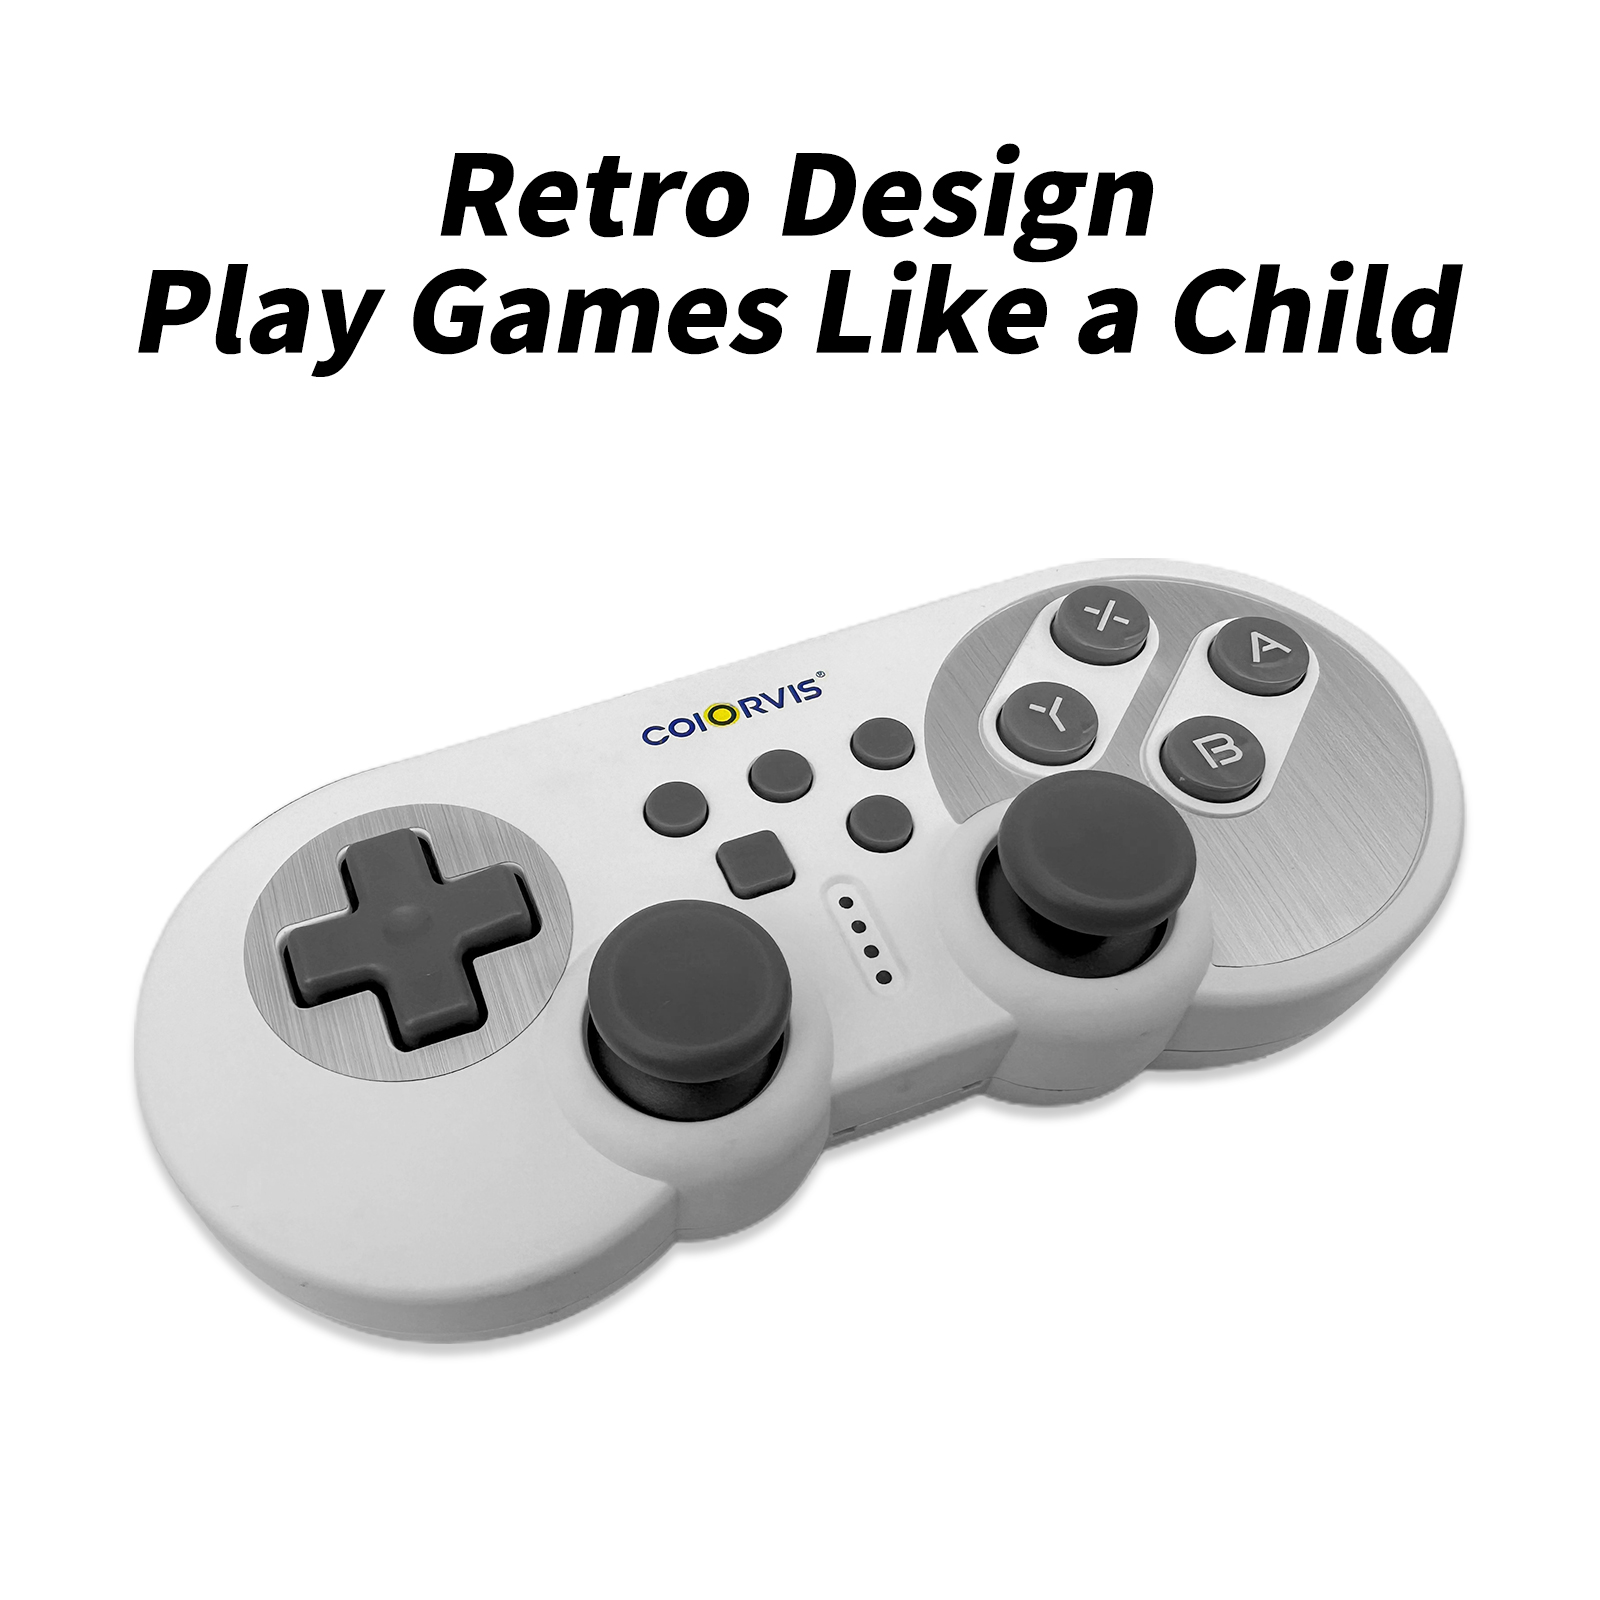 Classical pro controller is easy to carry and play the games like a child!